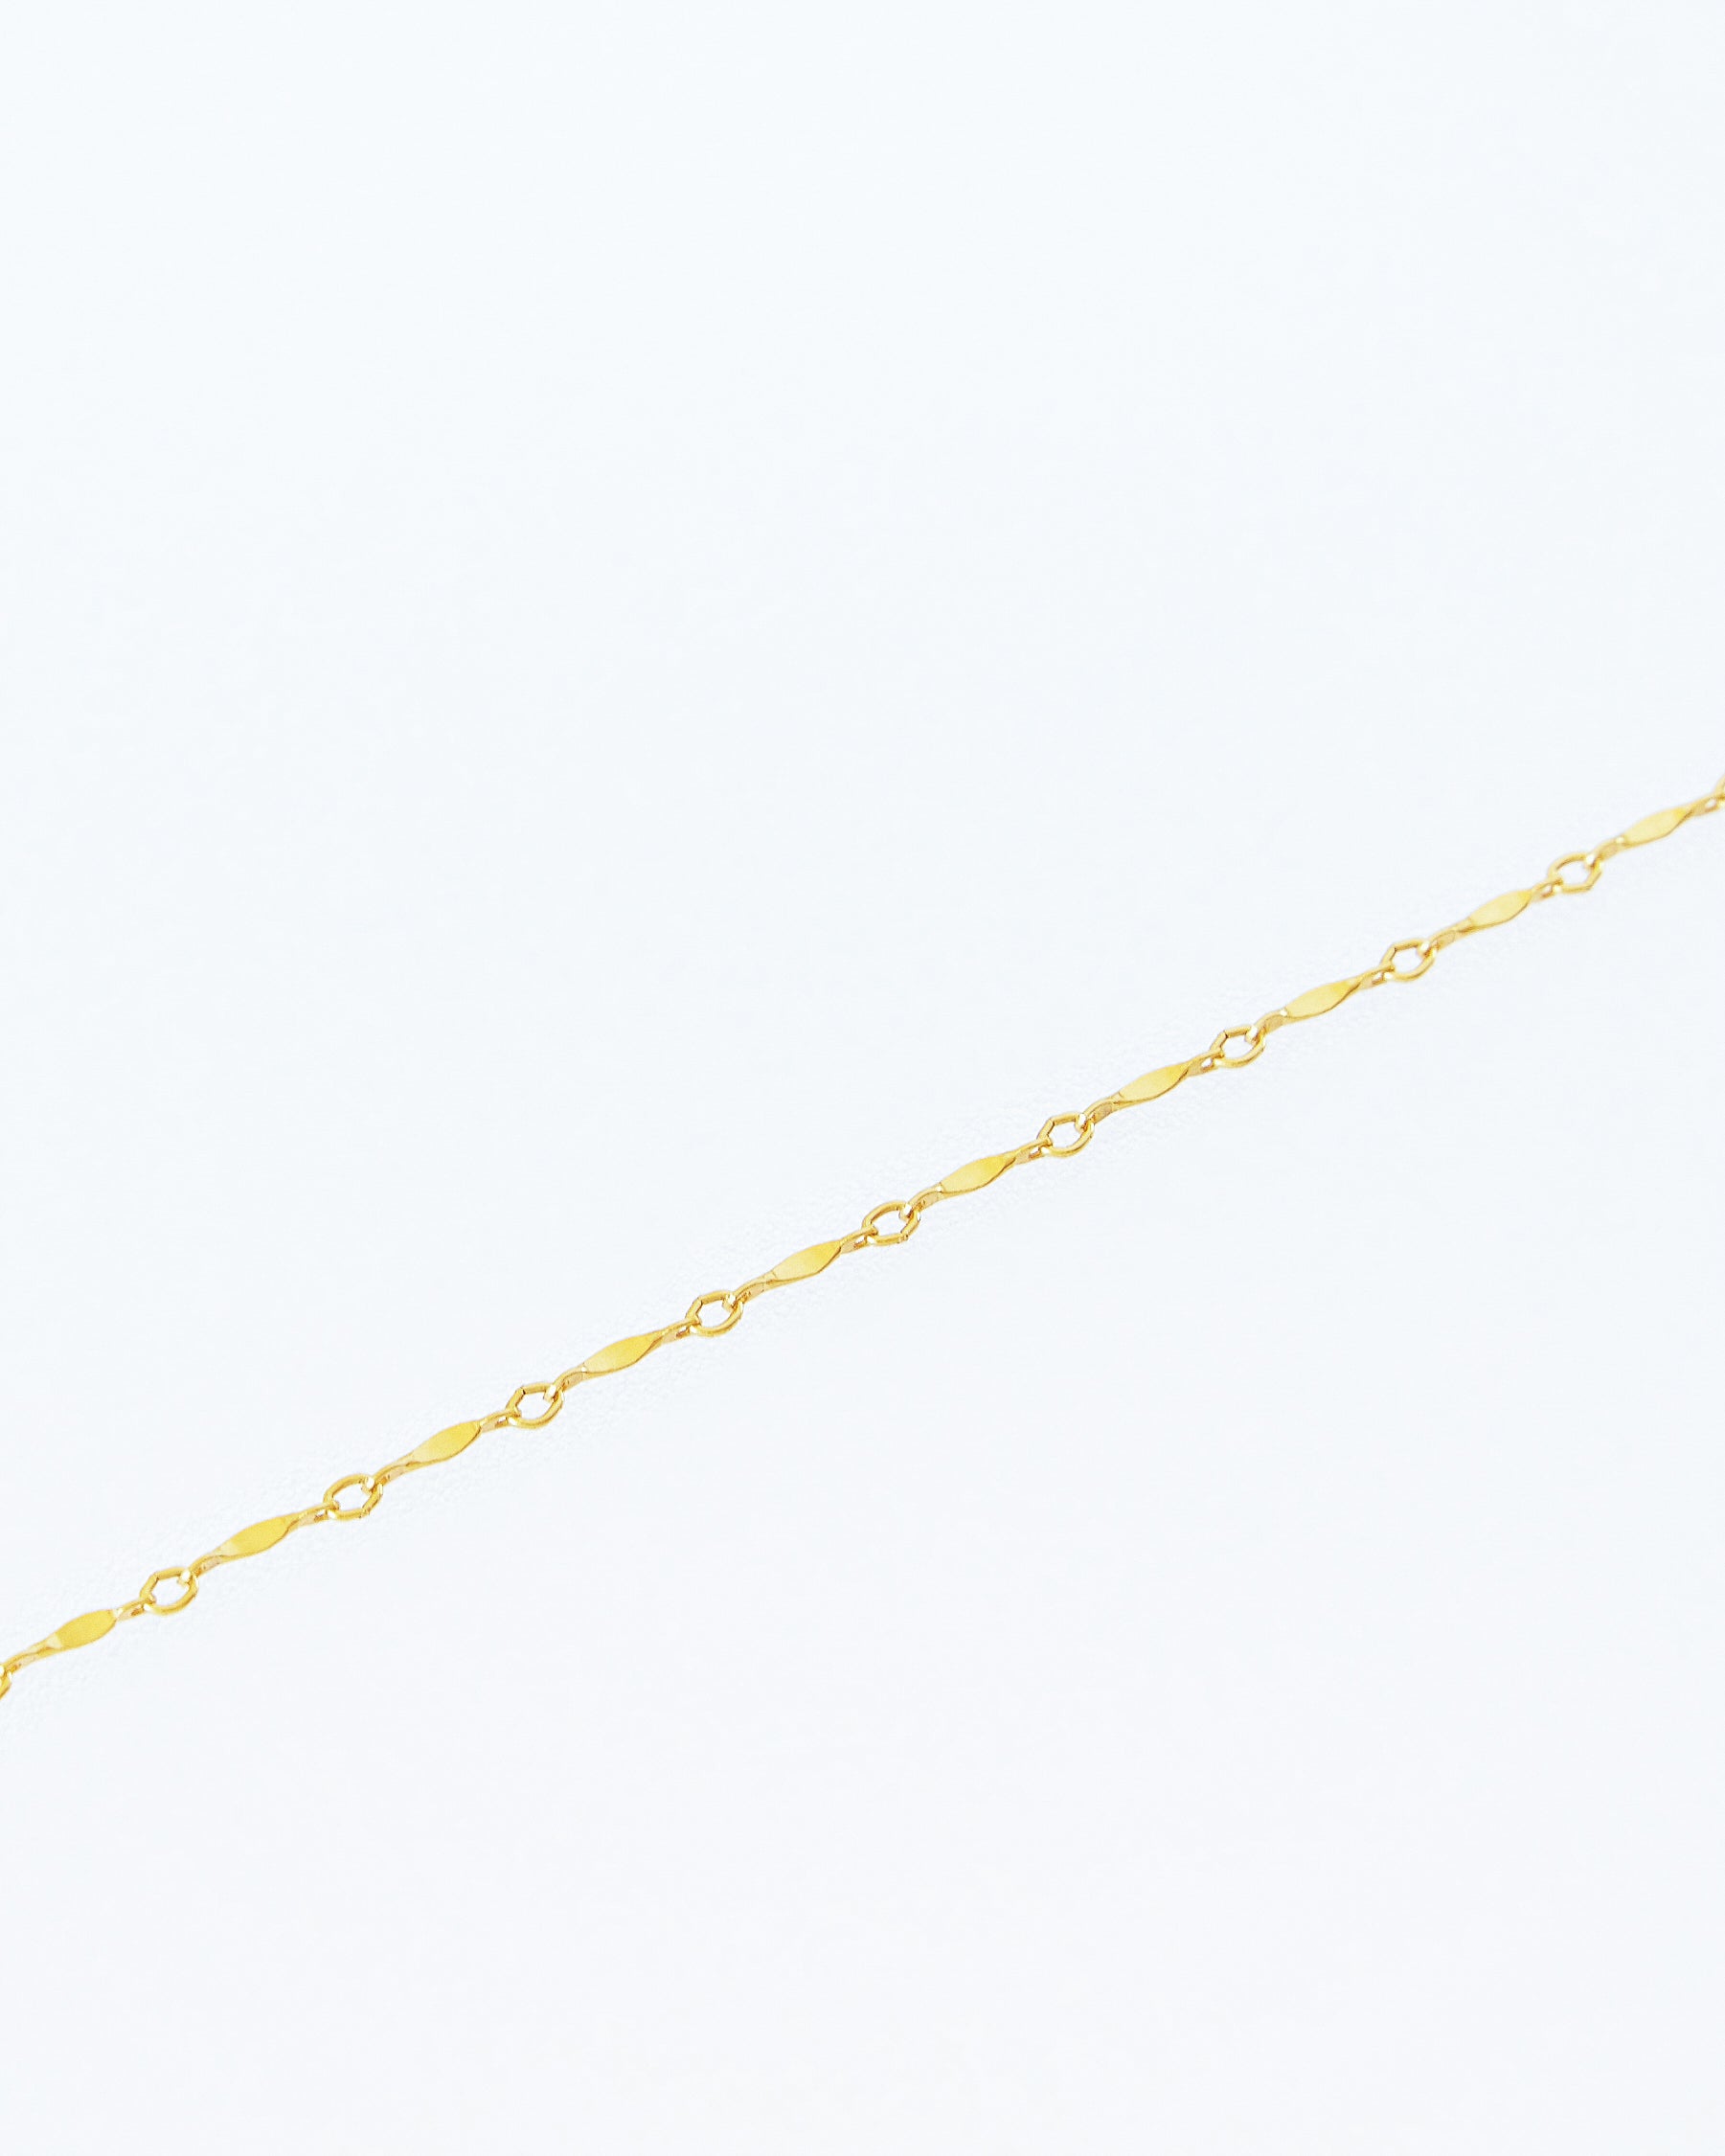 14K Gold Filled Bar Chain Necklace | Inspiration Her Jewellery